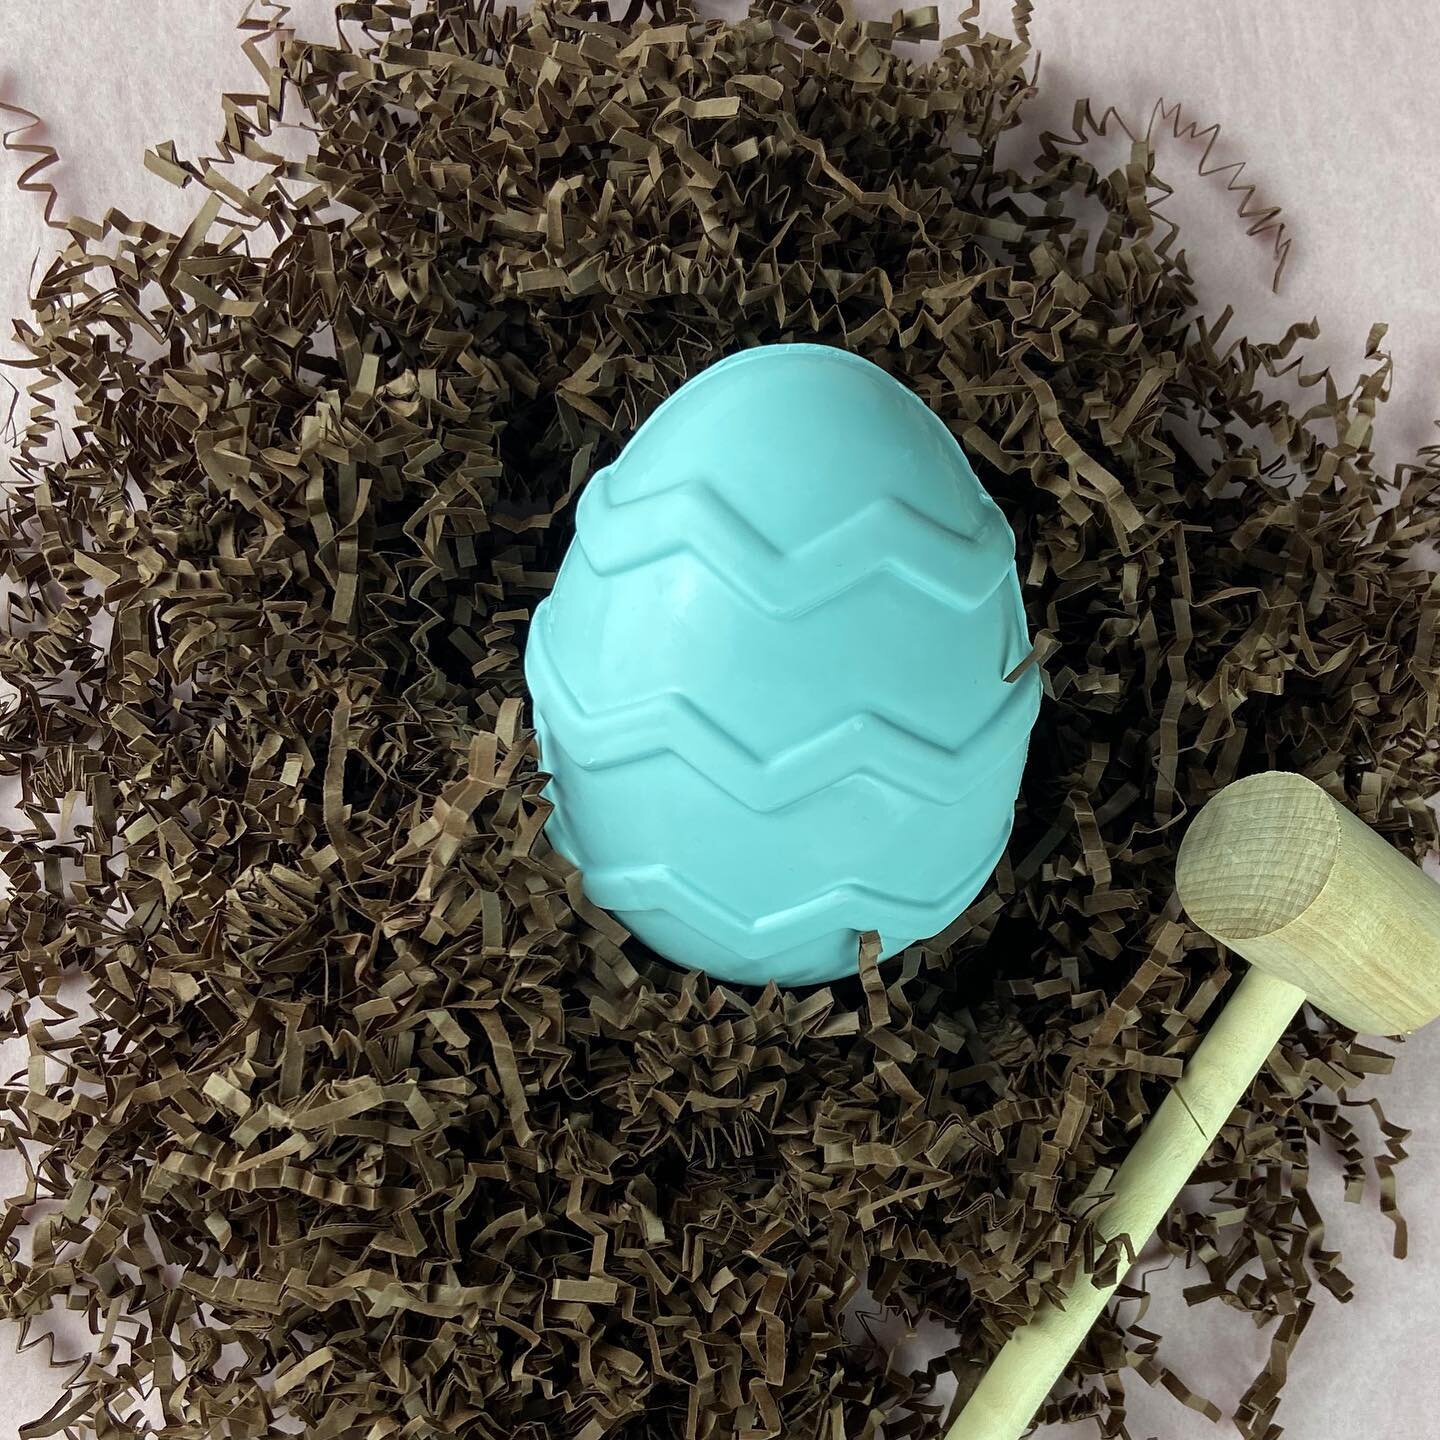 Easter Chocolate Egg Surprise! 
2nd item from Spring @cakeartbox has been revealed!! 🌼🌼🌼🌼🌼🌼🌼🌼🌼🌼🌼🌼🌼🌼🌼🌼🌼🌼🌼🌼 🌼🌼 #surpriseegg #eastereggsurprise #easteregg #couverturechocolate #springcakeartbox #springbox #subscriptionboxforbaker #